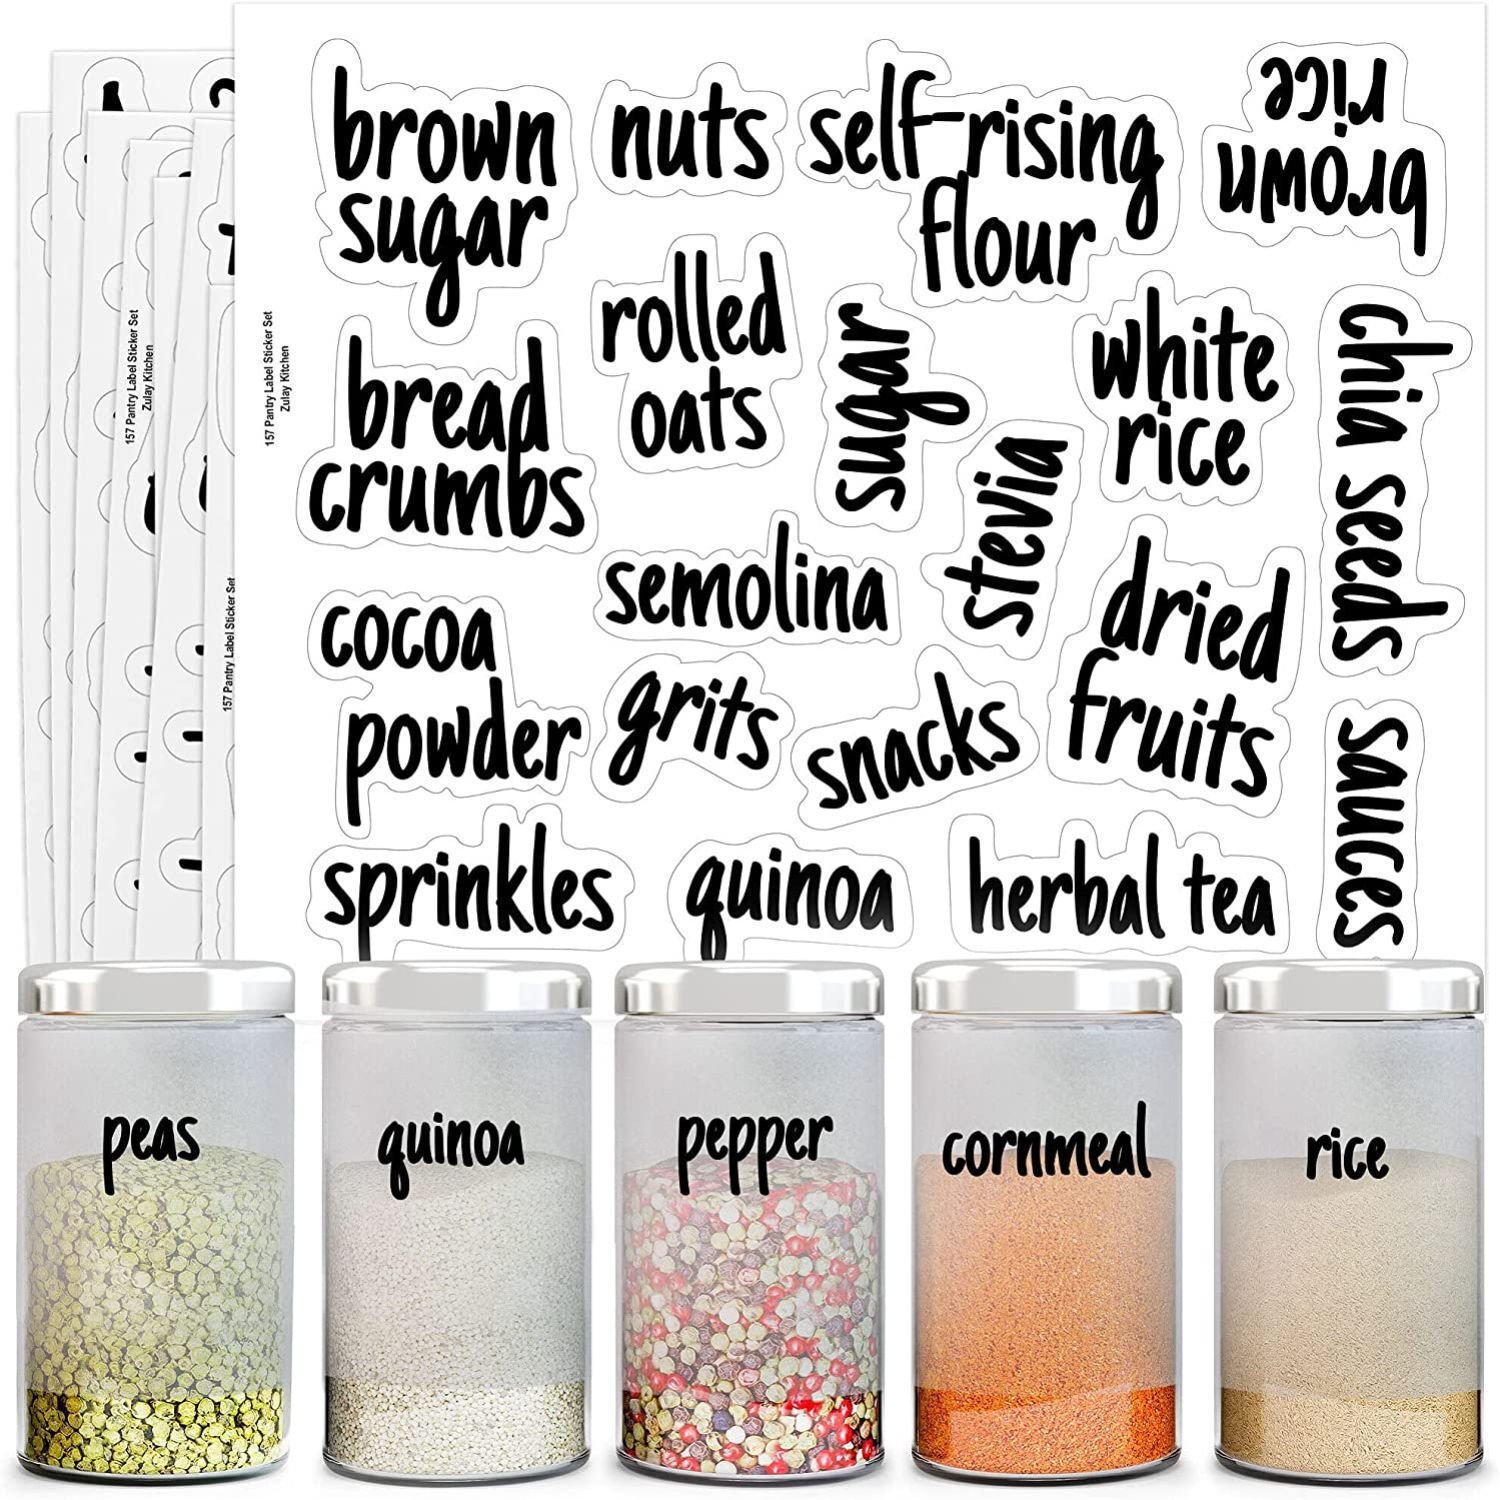 Talented Kitchen 24 Glass 6 oz Spice Jars with Lids and Labels, Sift/Pour, Course Shakers, Clear and Chalkboard Style Stickers